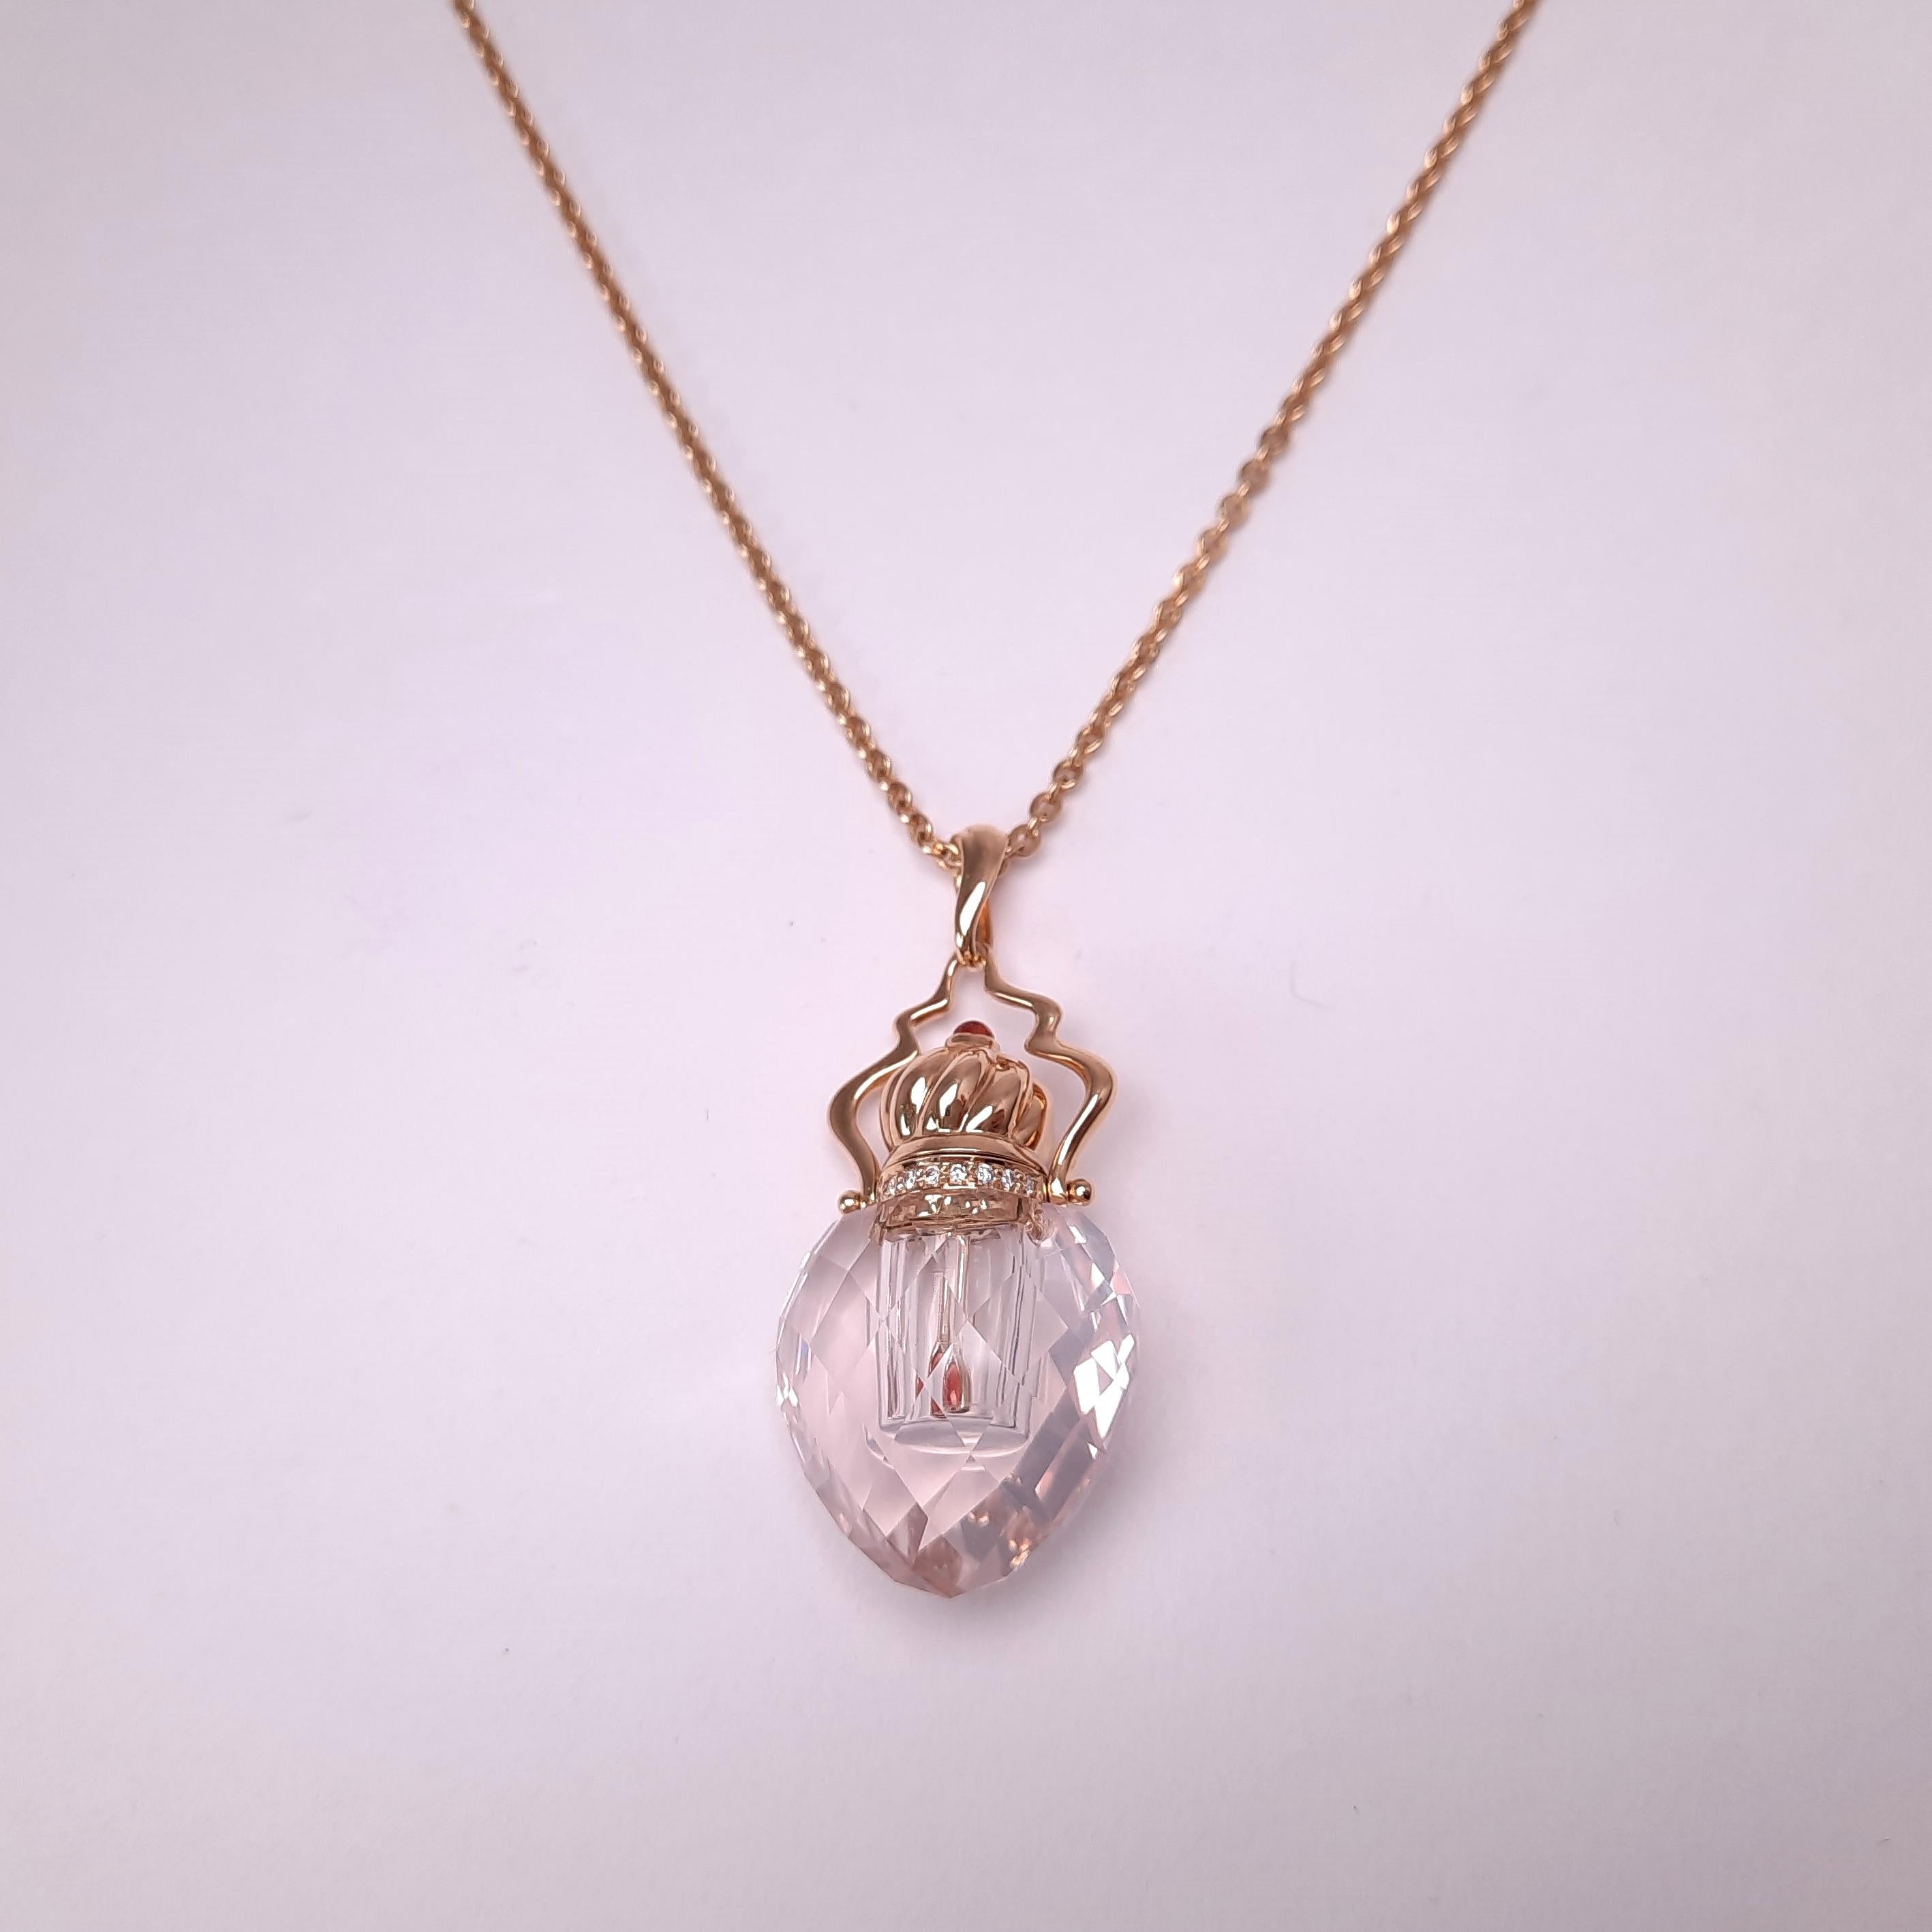 MOISEIKIN® invites you to a unique opportunity to keep your favourite scents at the very heart. Inspired by an ancient tradition, this precious pendant necklace has an elegant perfume bottle. The tender and feminine rose quartz is specially carved